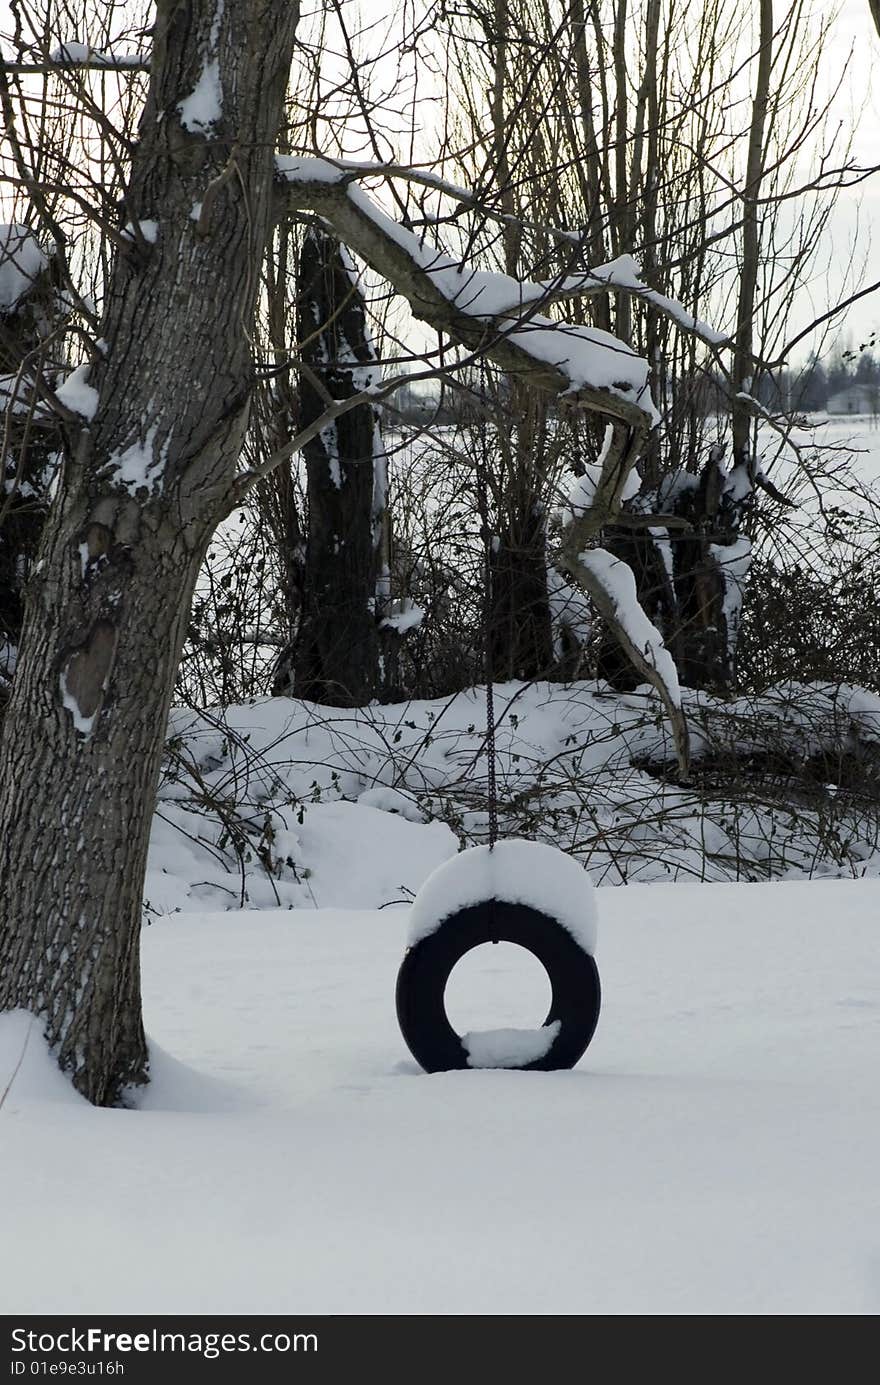 A snow covered tire swing alone on a cold winter day in a rural country yard. A snow covered tire swing alone on a cold winter day in a rural country yard.